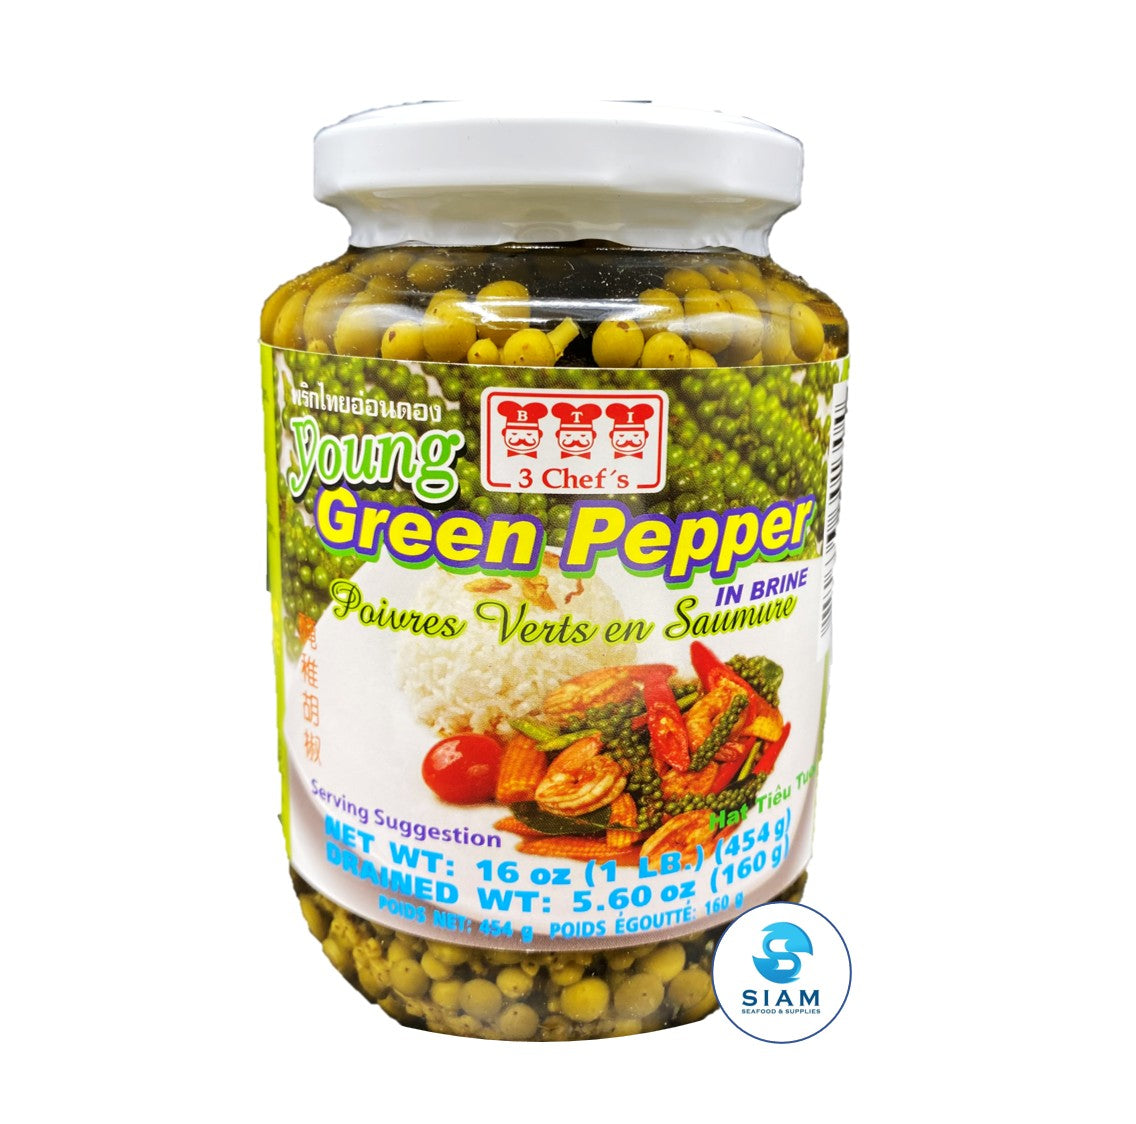 Young Green Pepper in Brine - 3 Chef's (Drained Wt 5.6 oz-Net Wt 25.2 oz)  shippable 3 Chef's